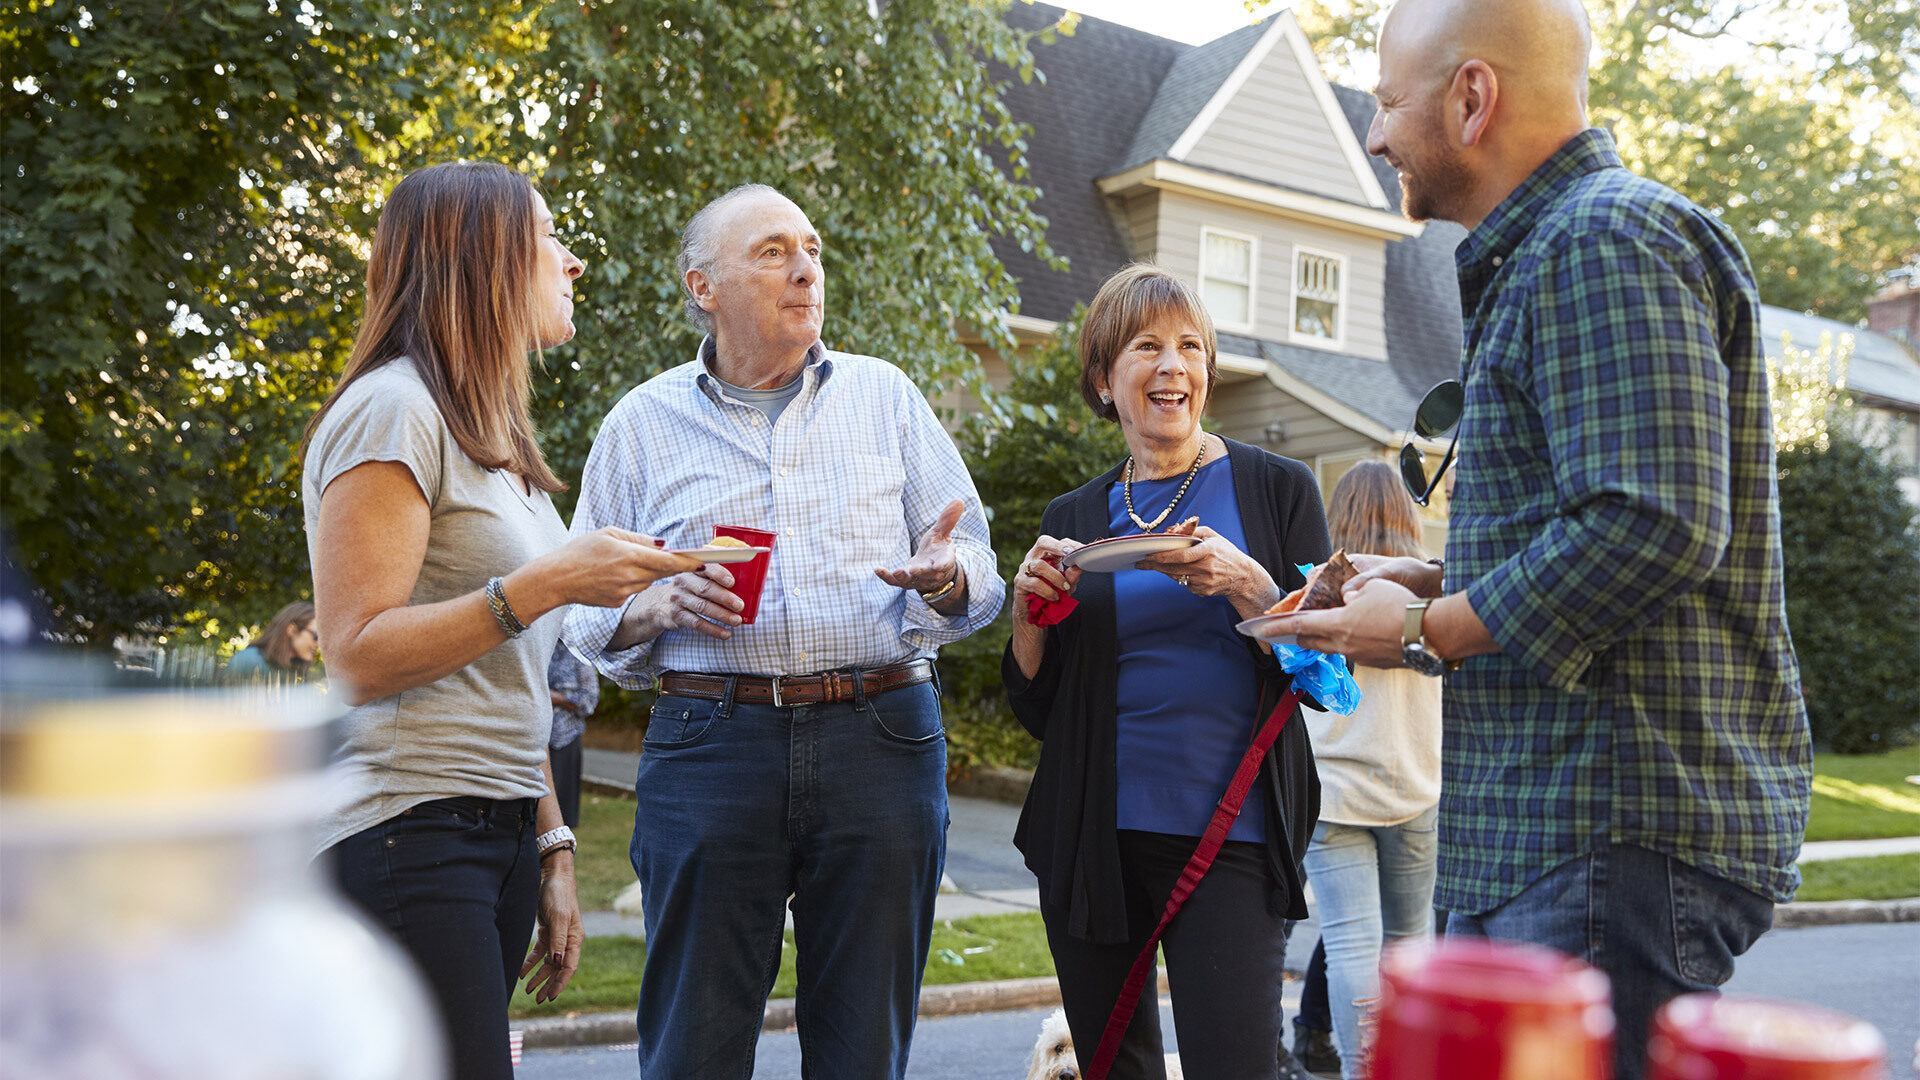 Neighbors talking at a block party